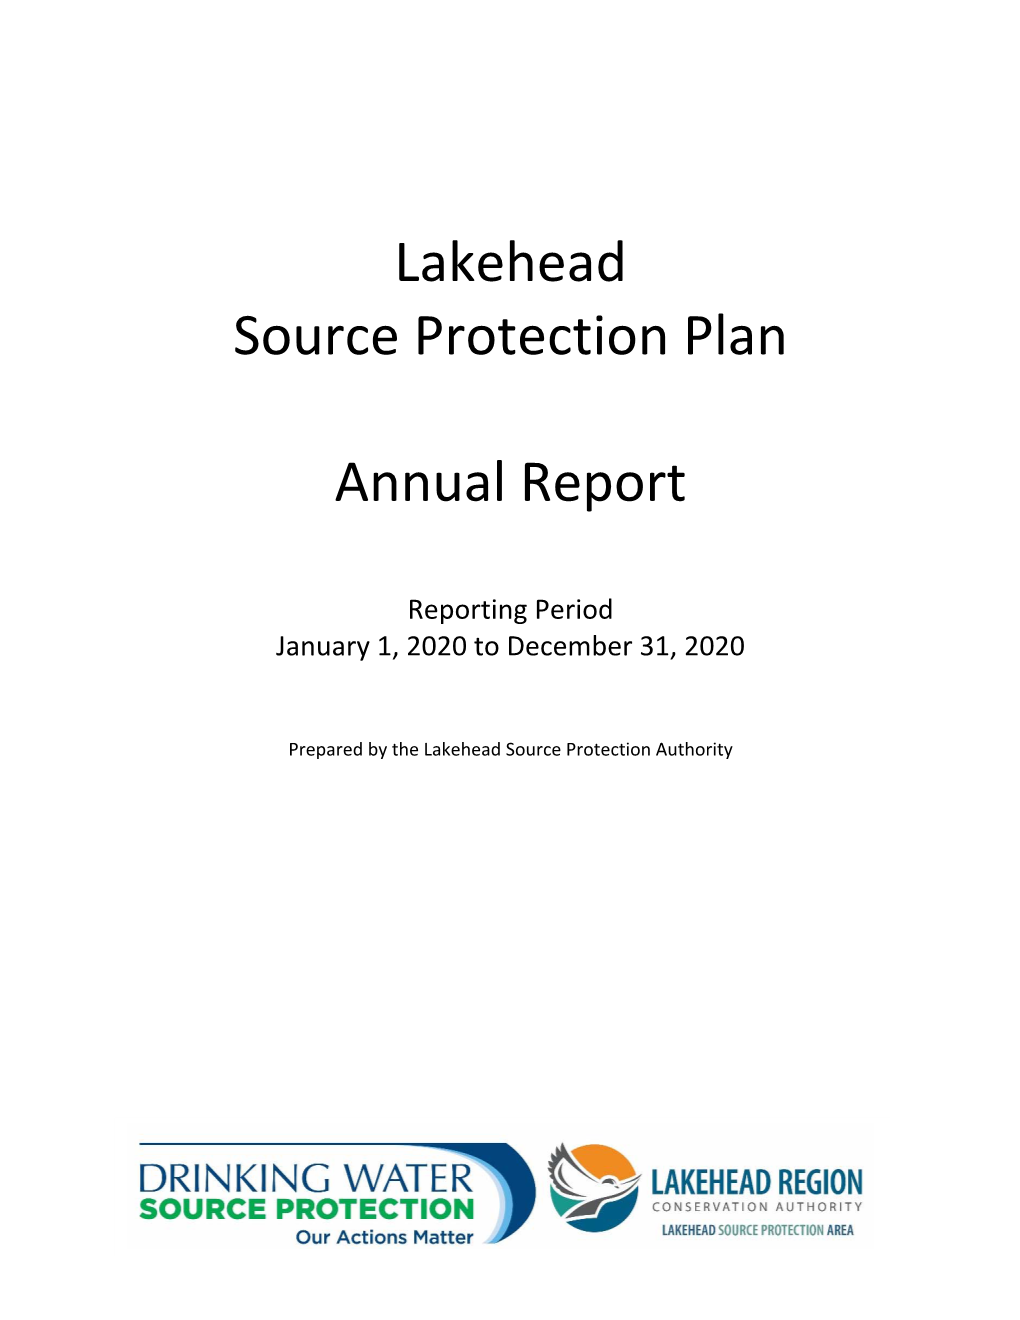 Lakehead Source Protection Plan Annual Report Reporting Period: January 1, 2020 to December 31, 2020